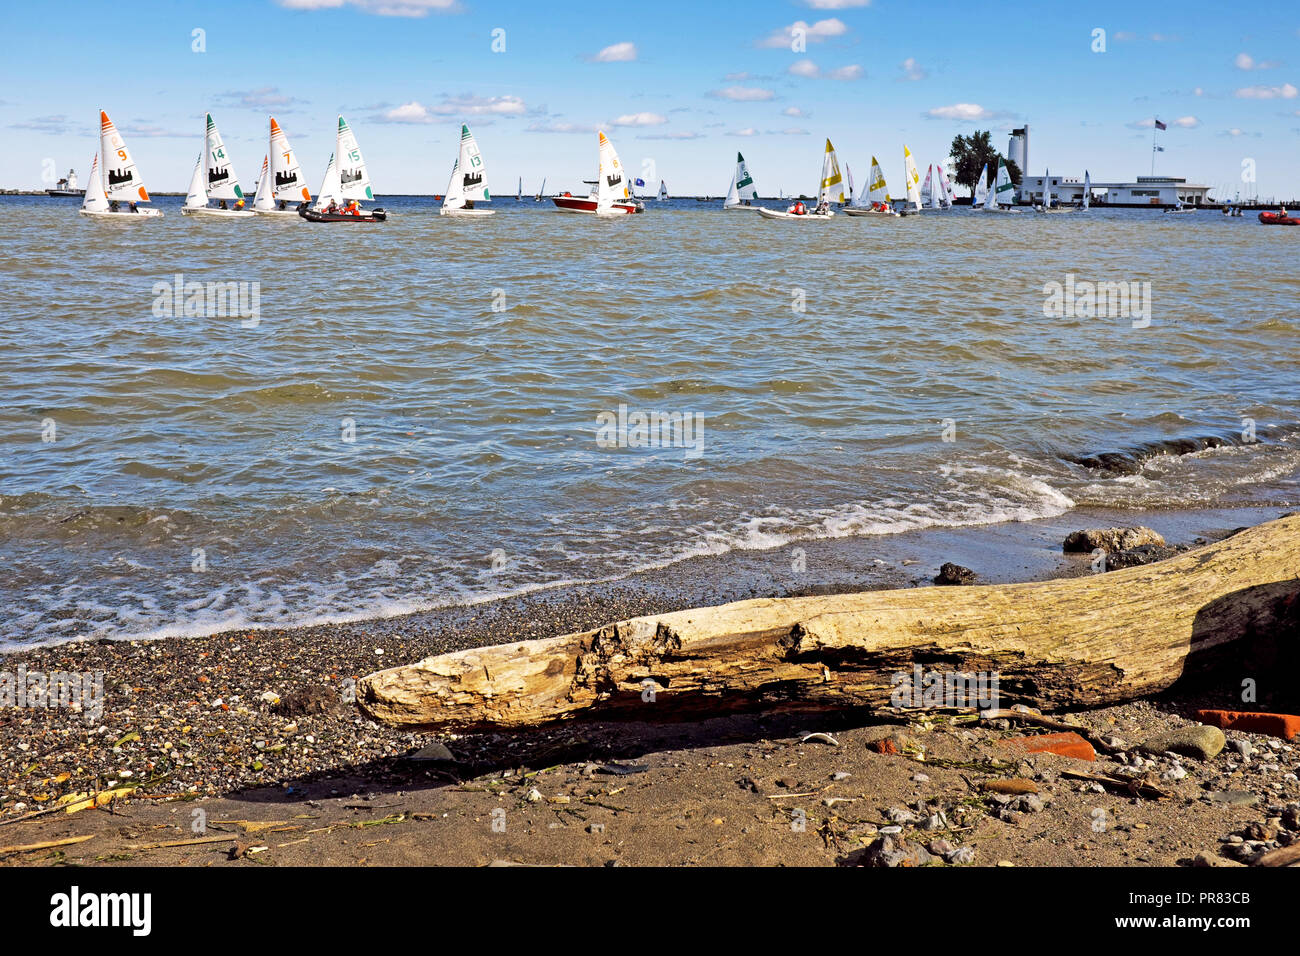 Cleveland, Ohio, USA.  29th Sept, 2018.  The 2018 U.S. sailing team racing championship is held in a harbor off Lake Erie in Cleveland, Ohio, USA from September 28-30, 2018.  The first time it is held in the midwest, it is one of eight U.S. sailing adult championships and one of the most prestigious.  The team racing event cometes for the George R. Himan Tropy and the chancer to enter the 2019 World Sailing Team Championships. Credit: Mark Kanning/Alamy Live News Stock Photo